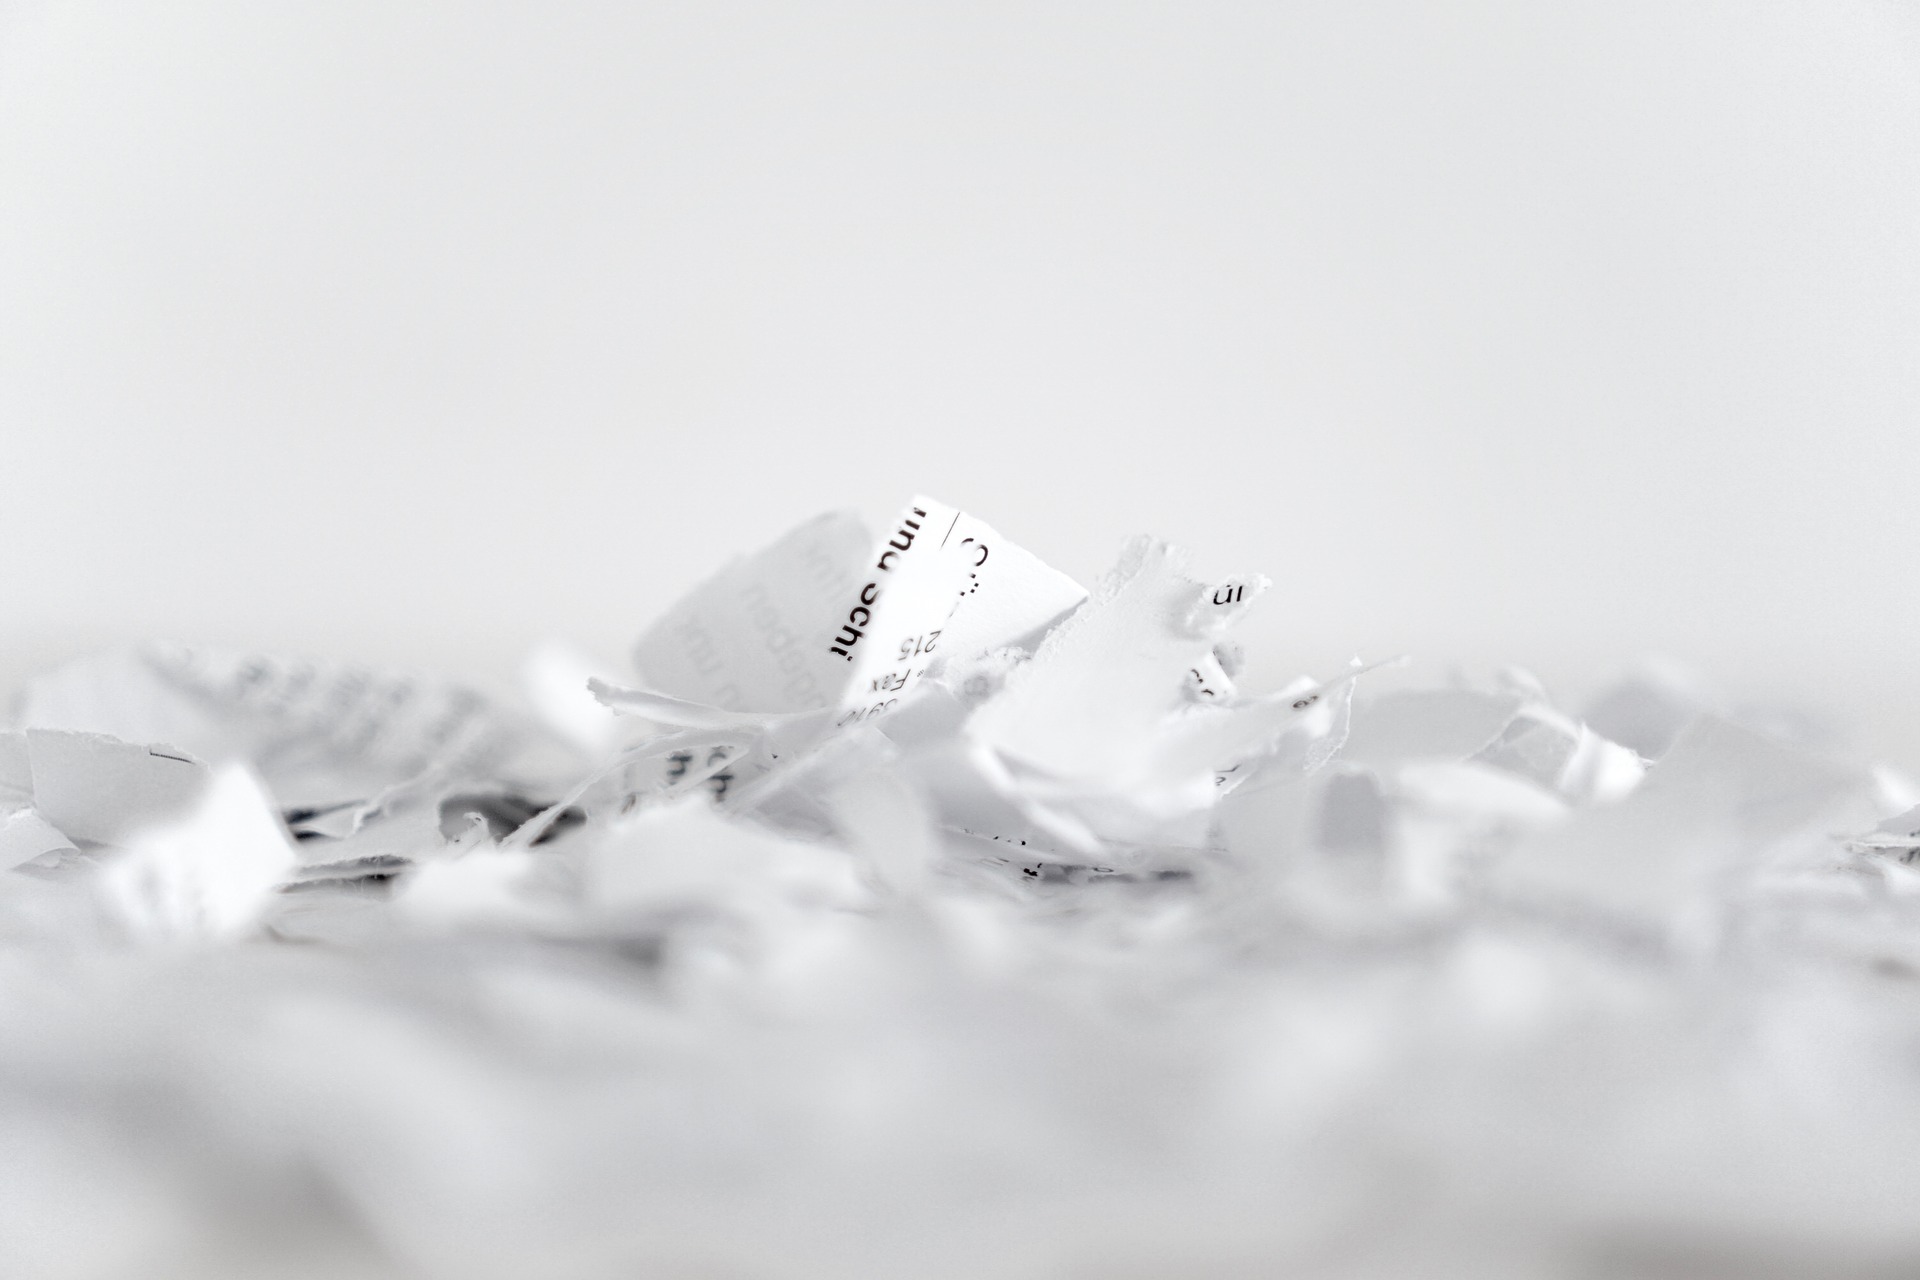 Shred, Shred, Shred - Disposing Of Paper Waste Carefully As A Business